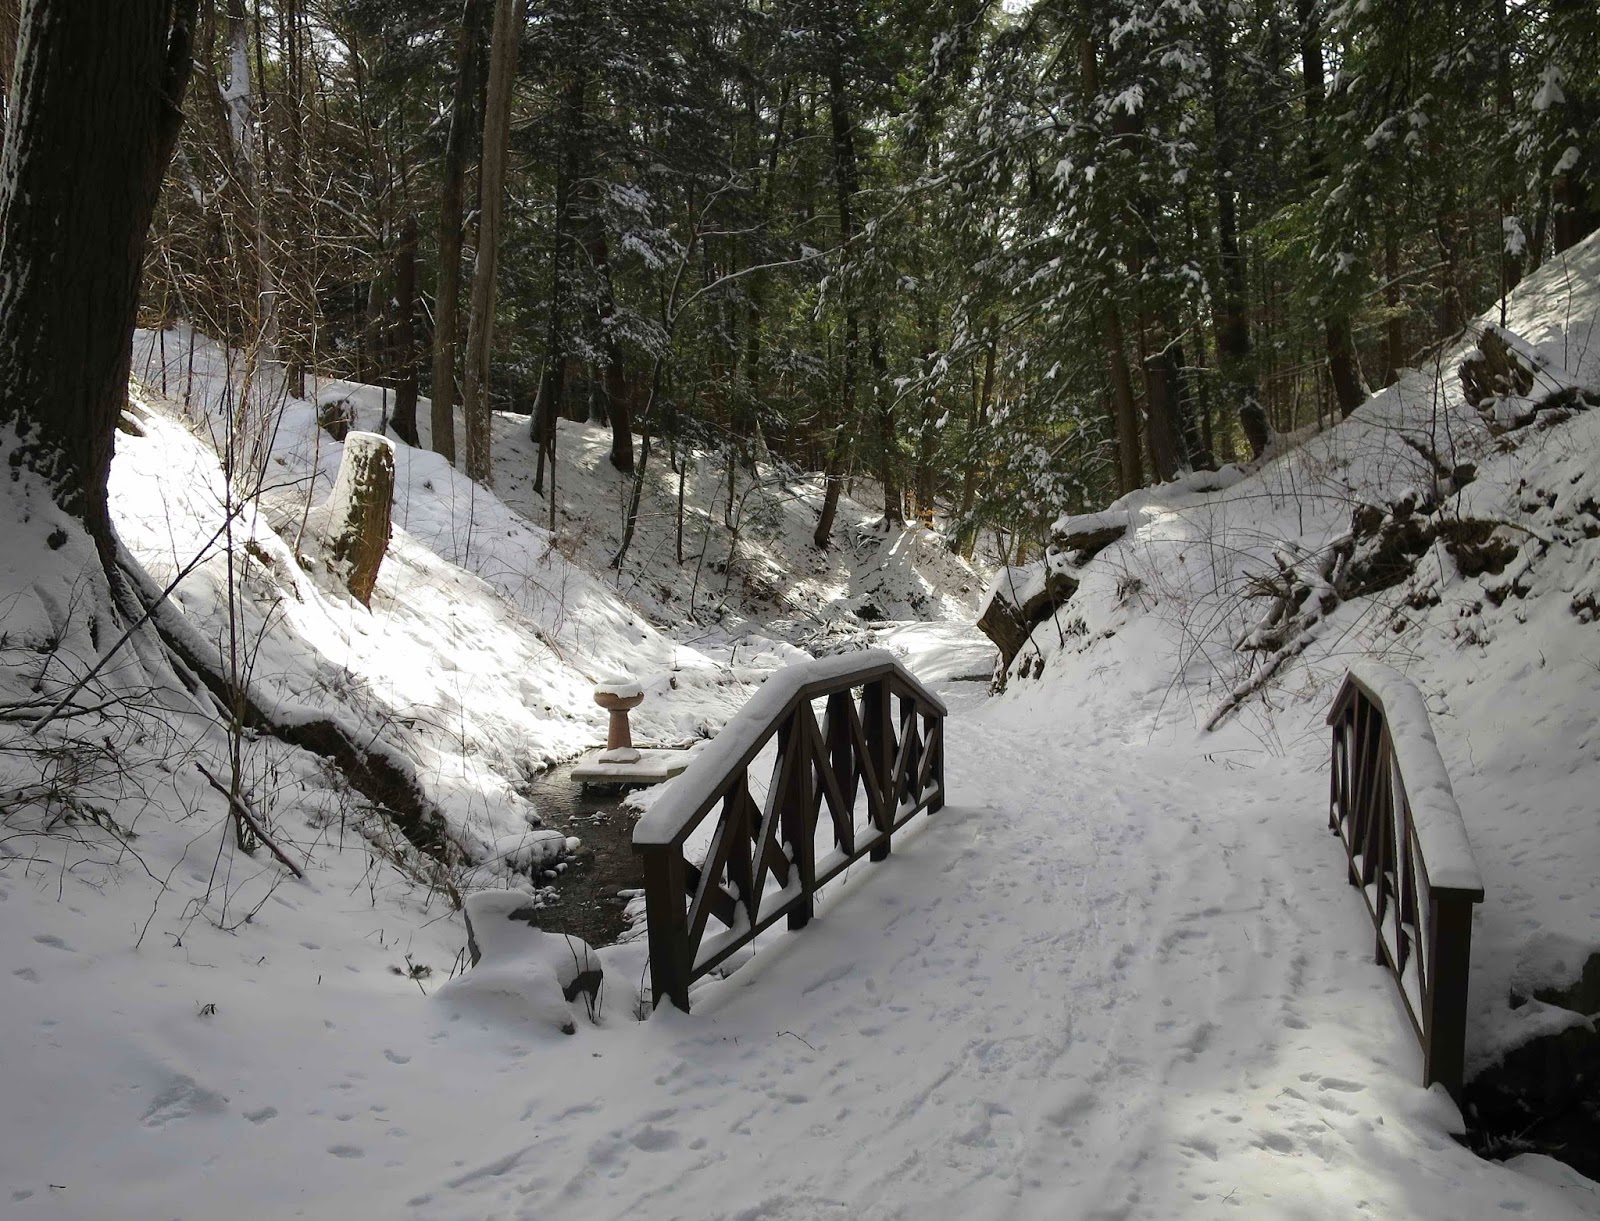 Saratoga woods and waterways: Snowy Trail Through the Spa